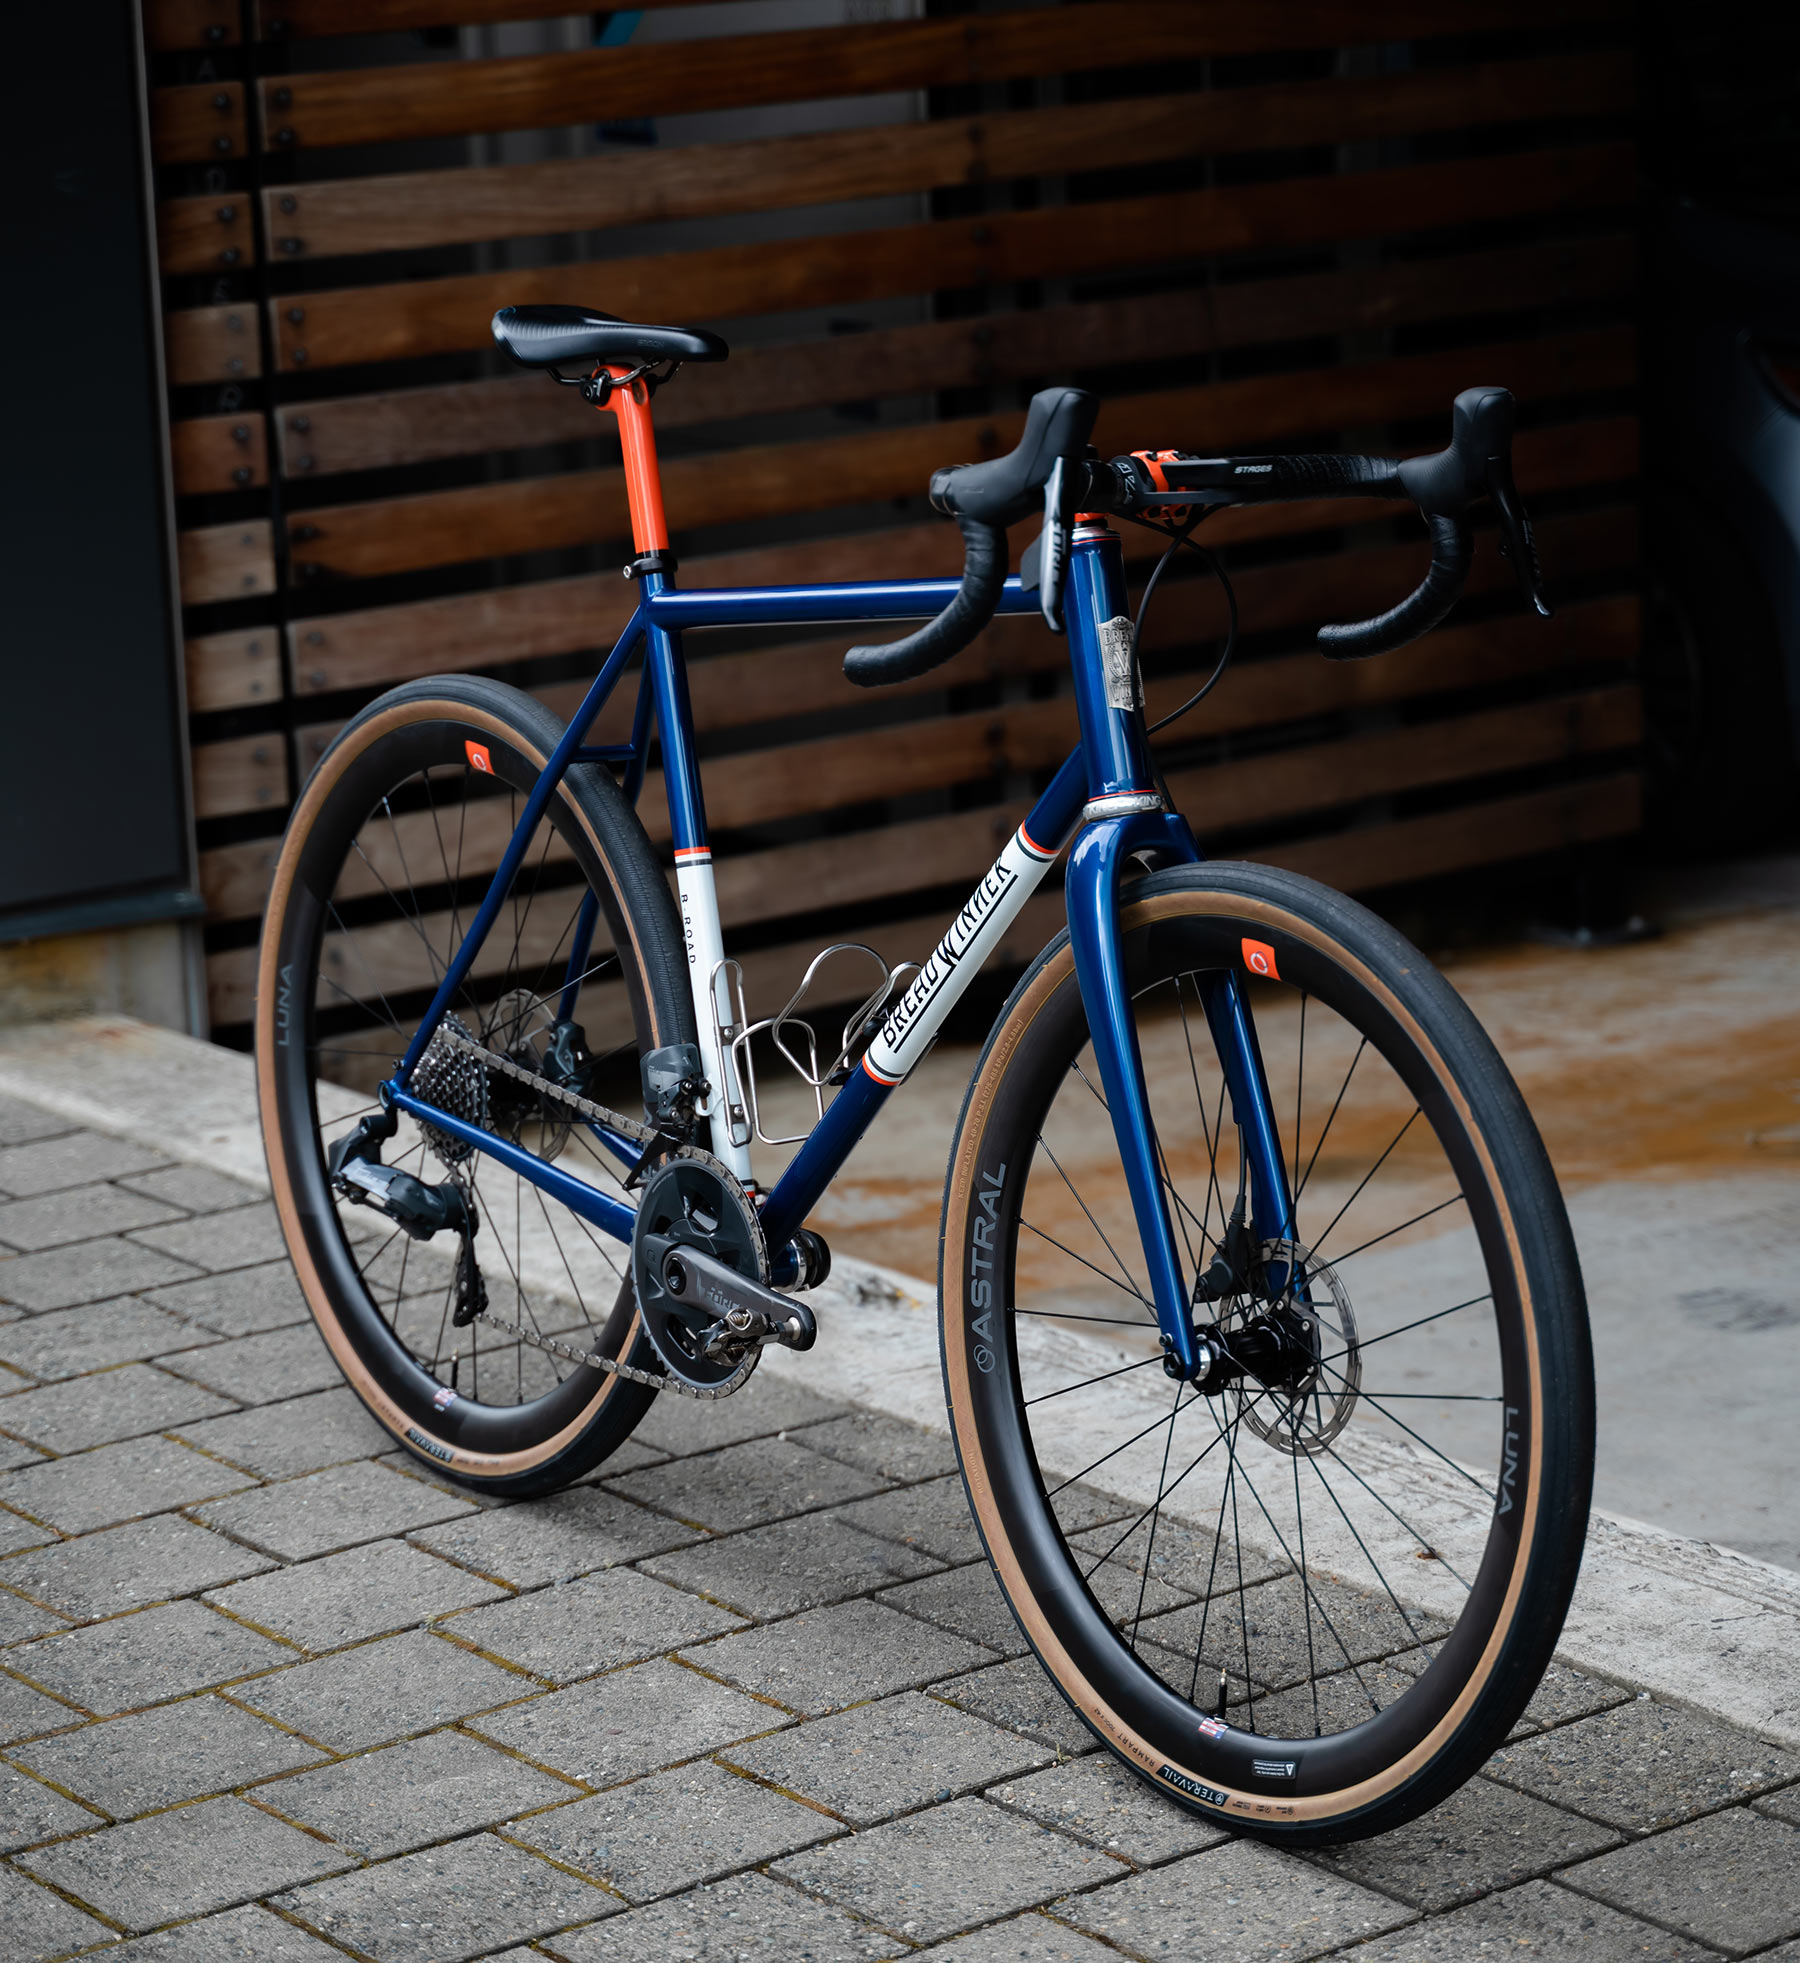 astral luna carbon all-road wheels shown on a bike